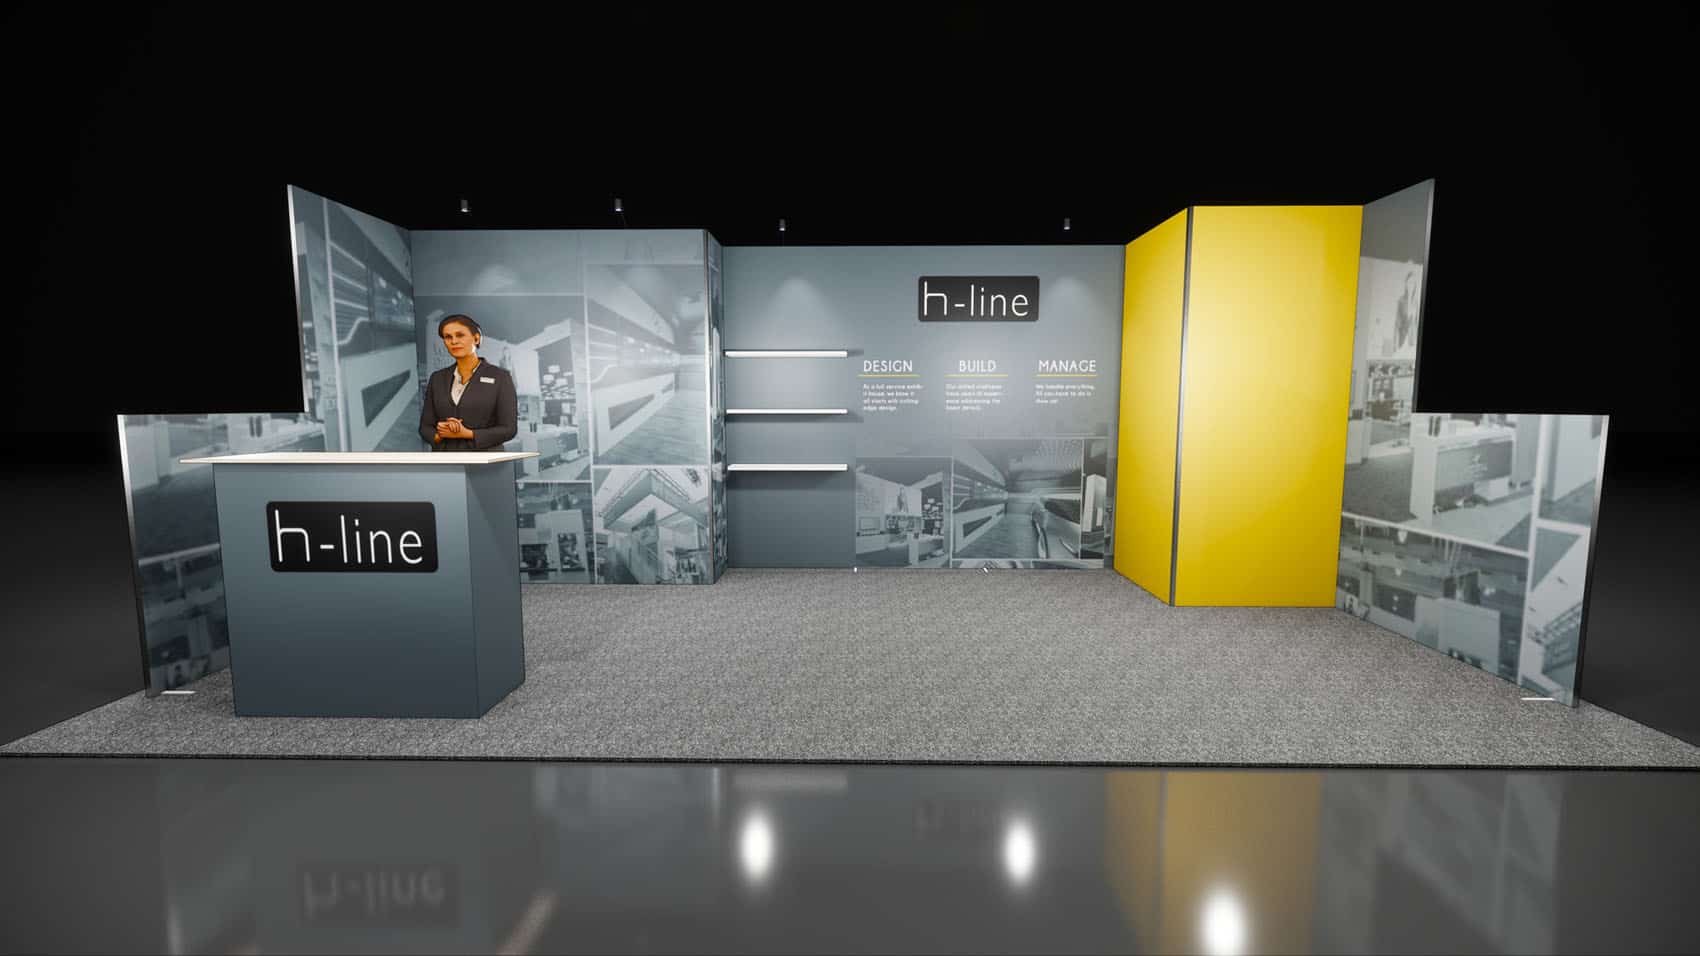 inline fabric tradeshow booth